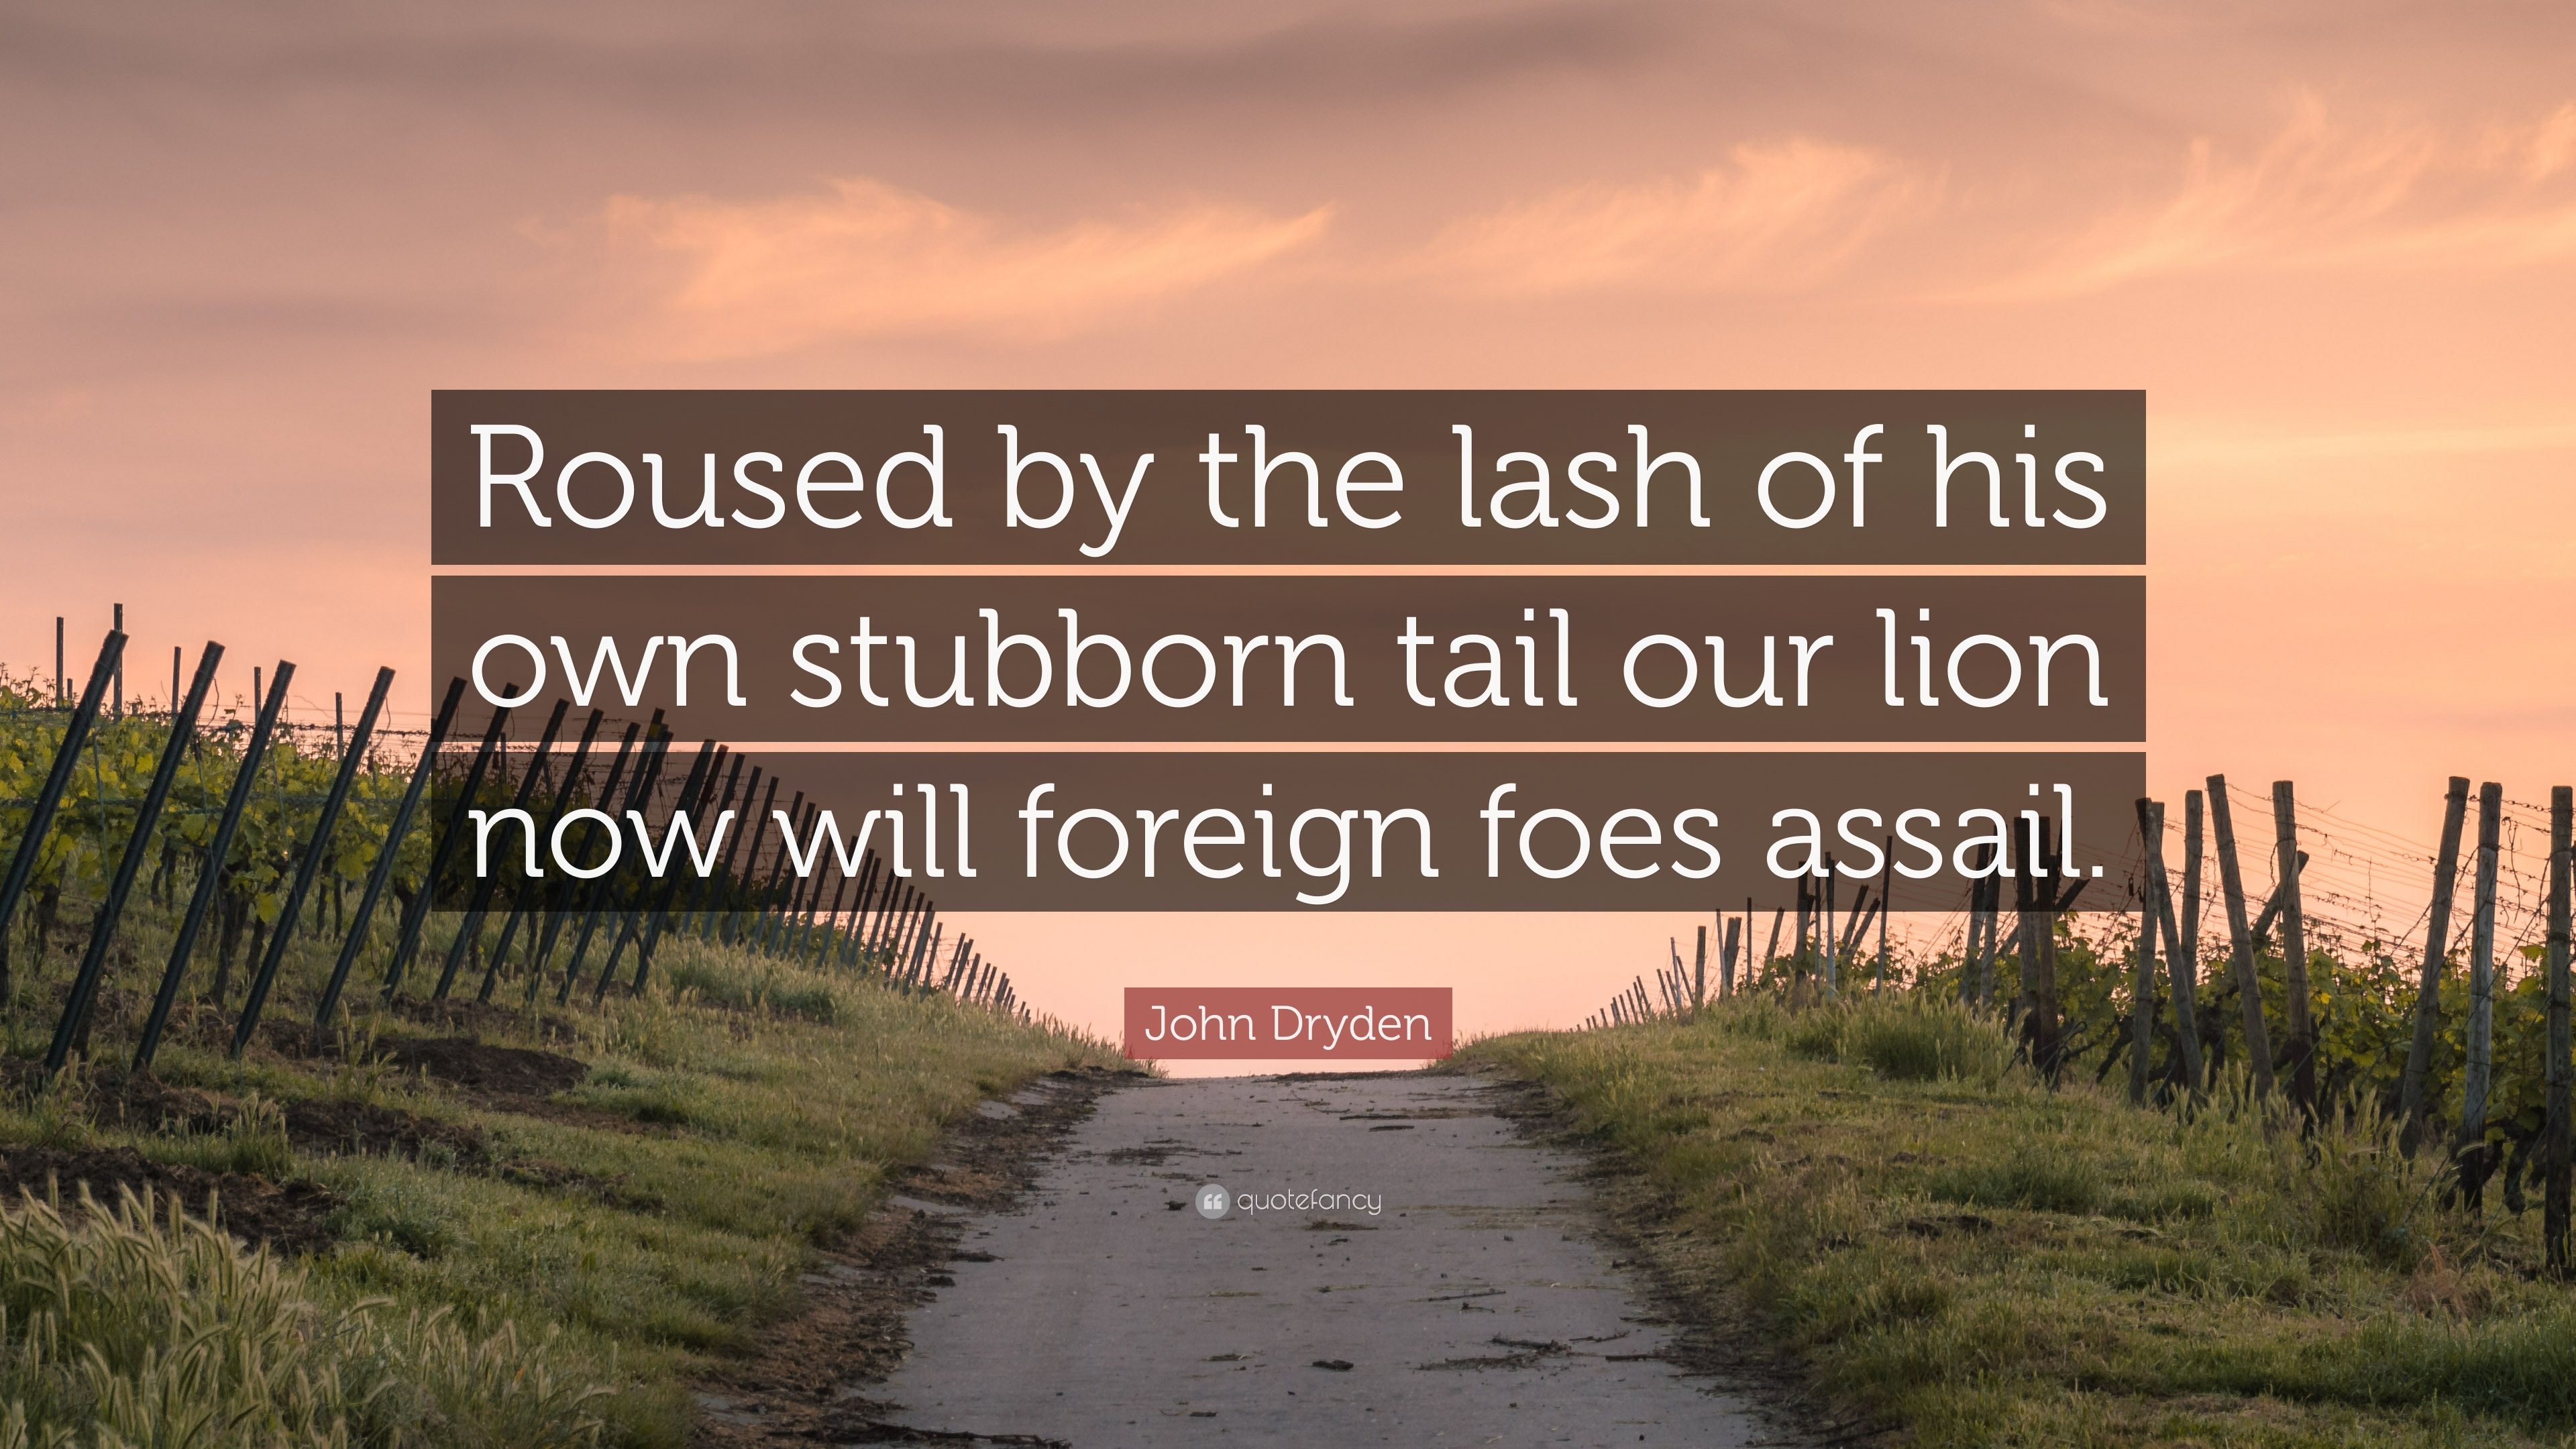 John Dryden Quote: “Roused by the lash of his own stubborn tail our lion now will foreign foes assail.” (7 wallpaper)